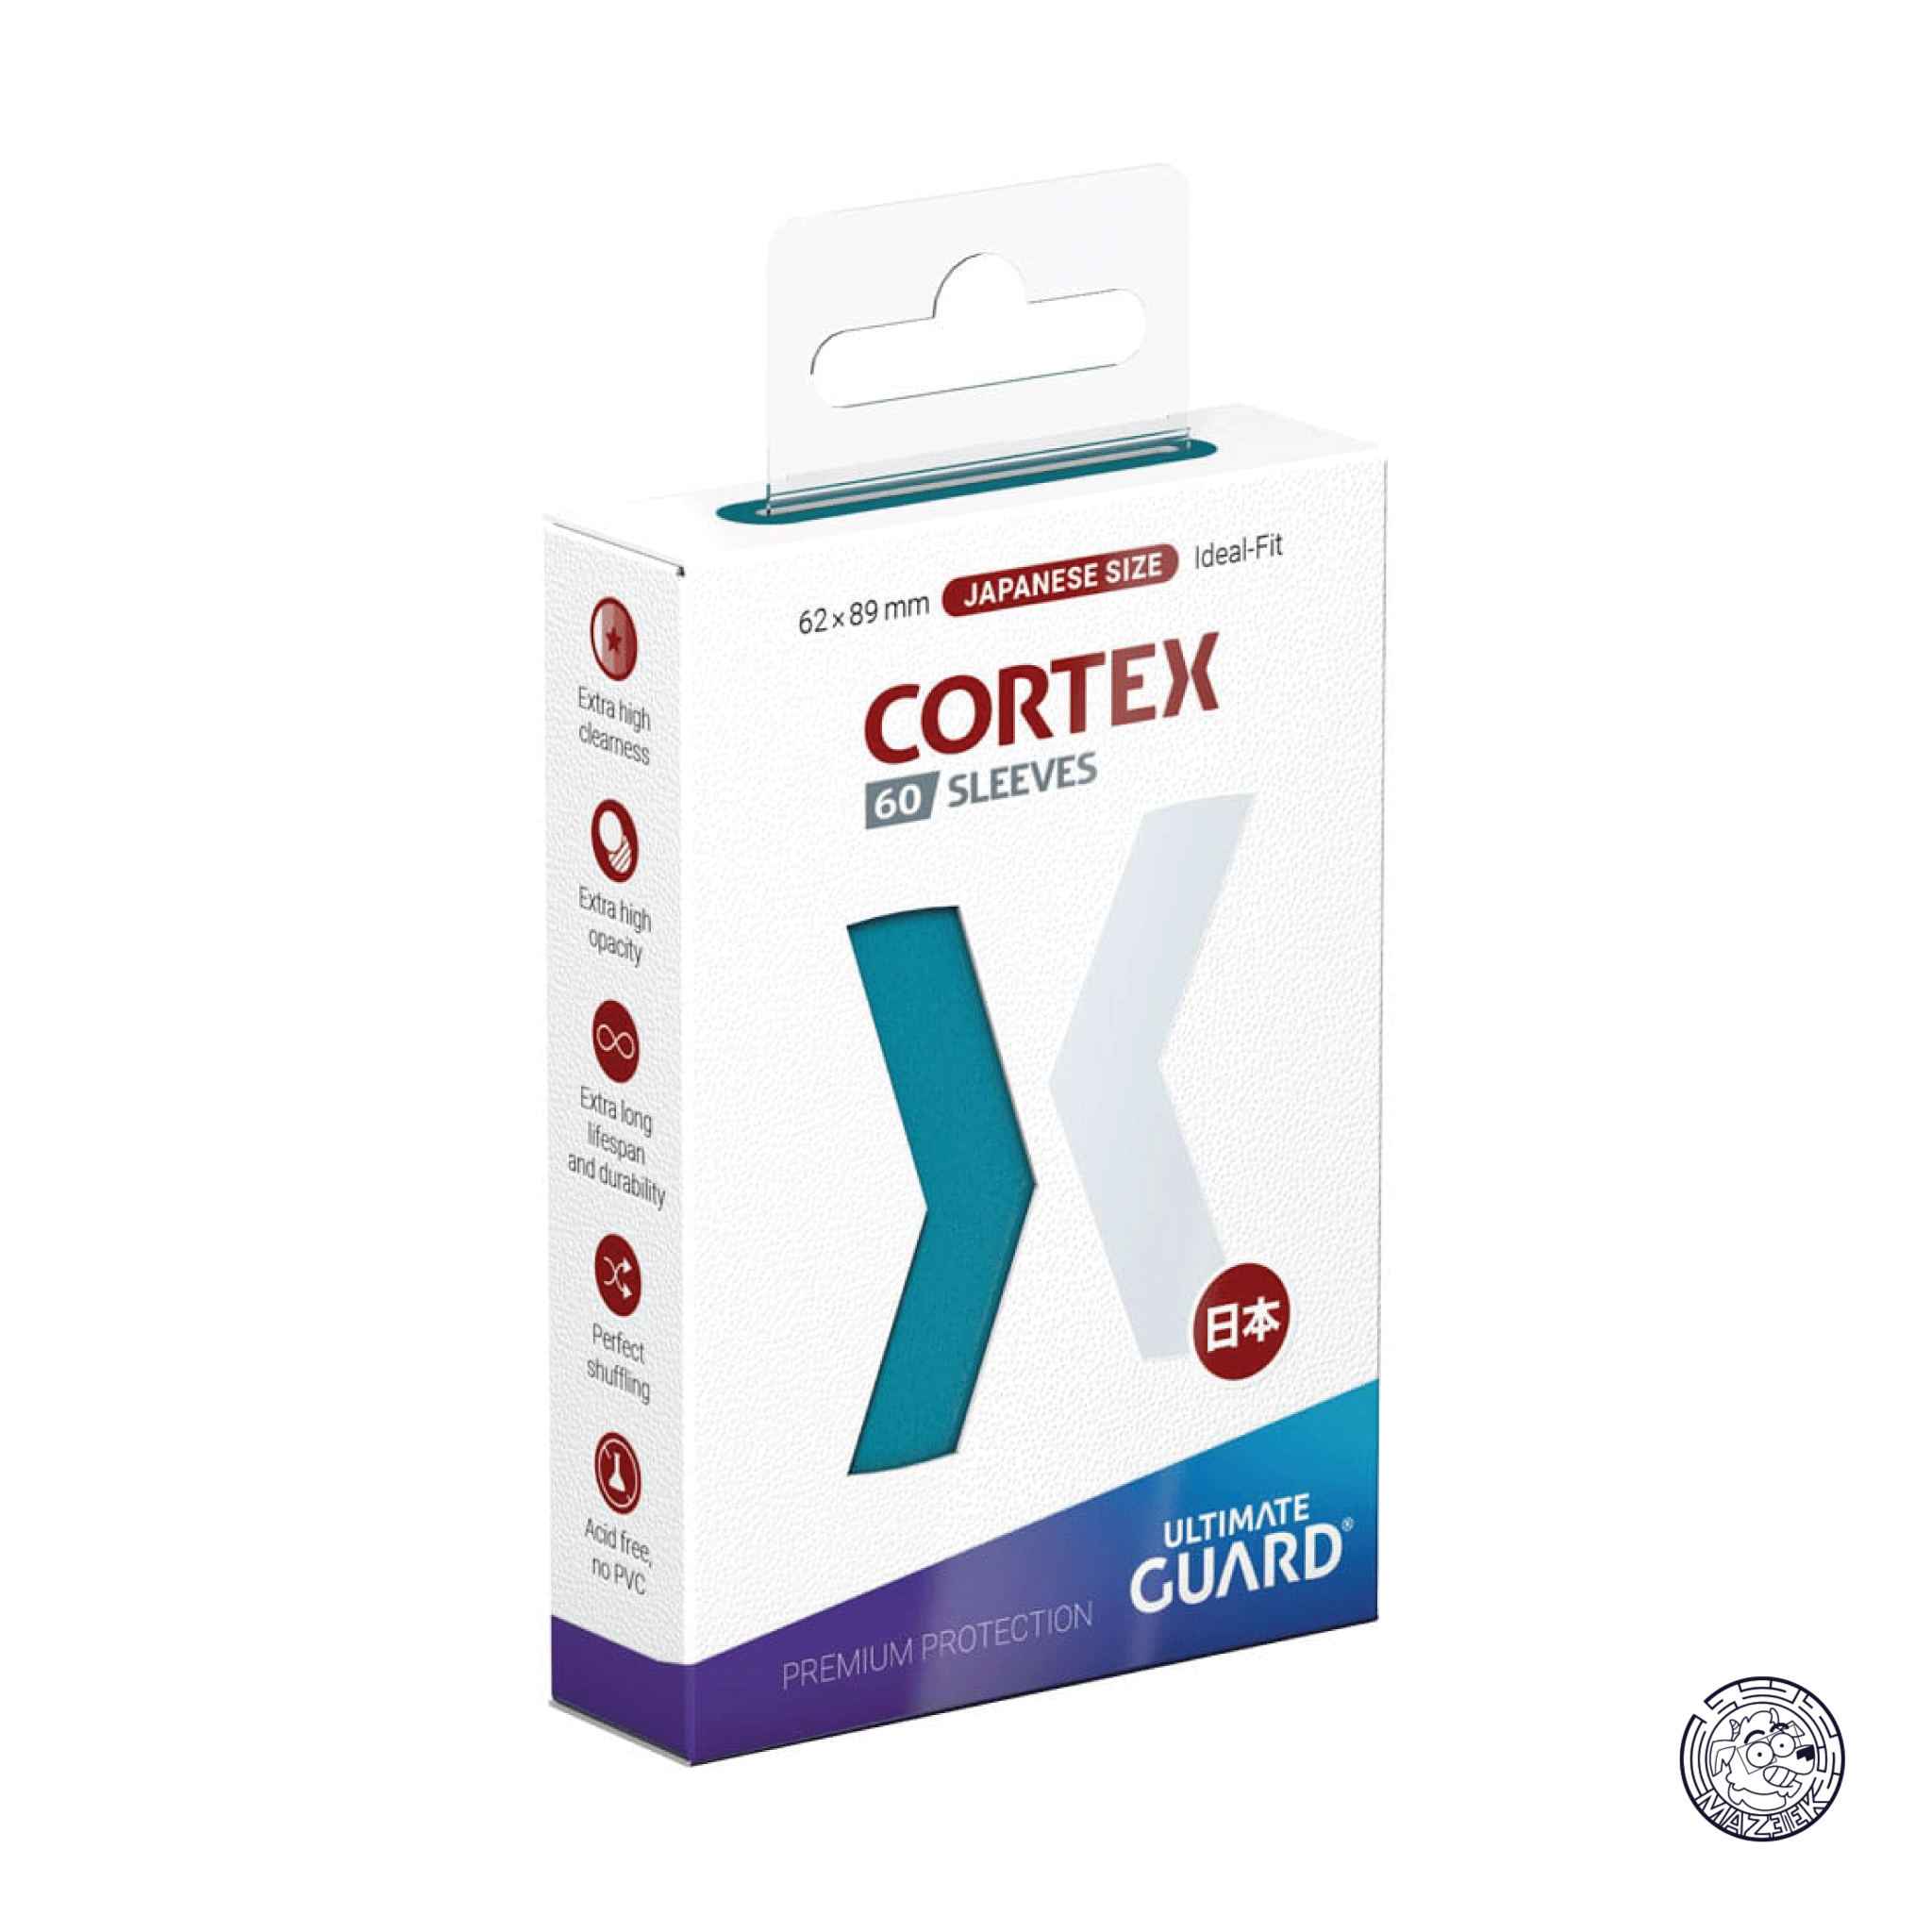 Ultimate Guard - 60 Sleeves Cortex: Japanese Size 62x89 mm (Petrol)